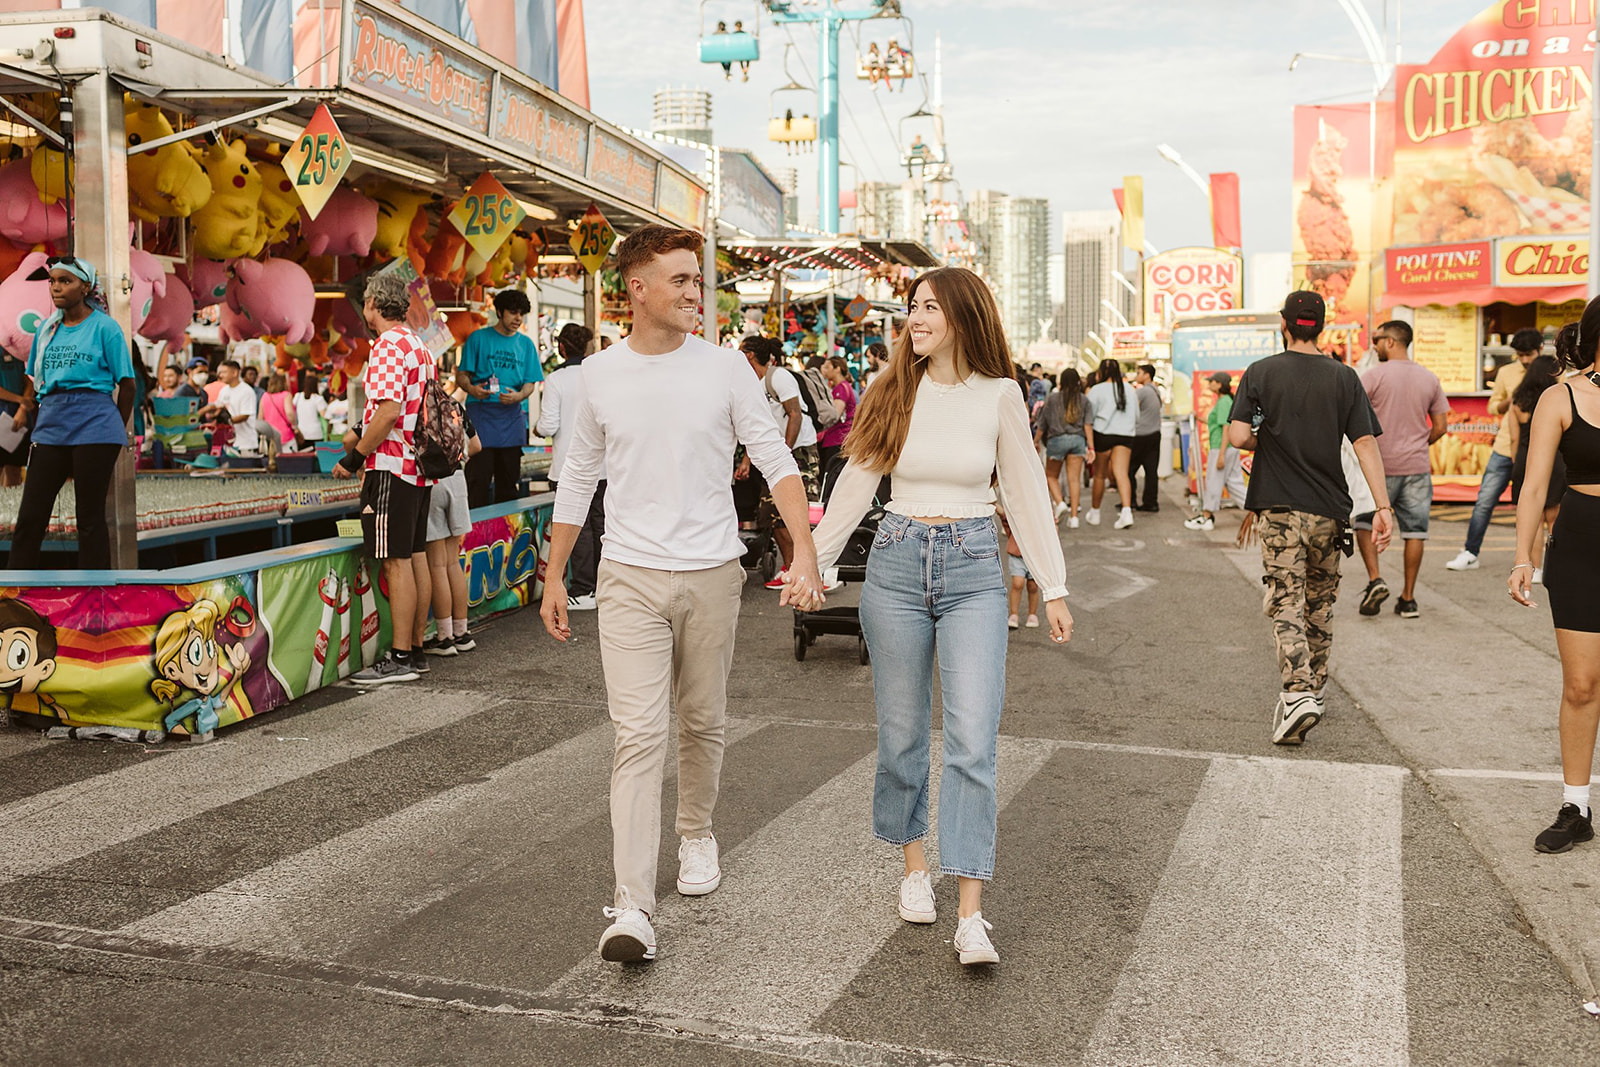 Engagement session at the CNE fair in Toronto